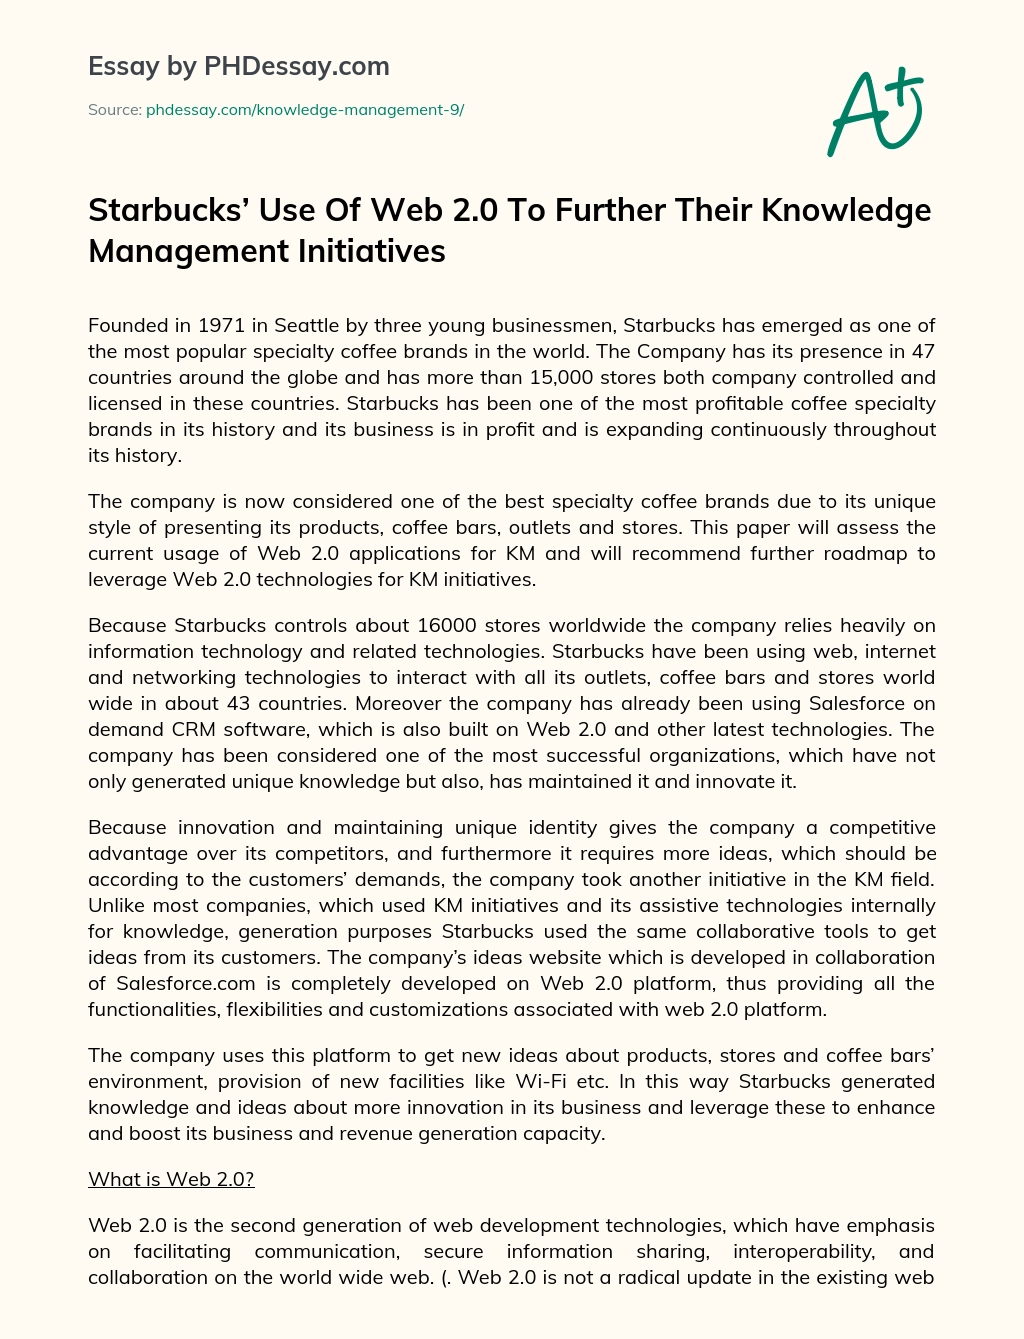 Starbucks’ Use Of Web 2.0 To Further Their Knowledge Management Initiatives essay